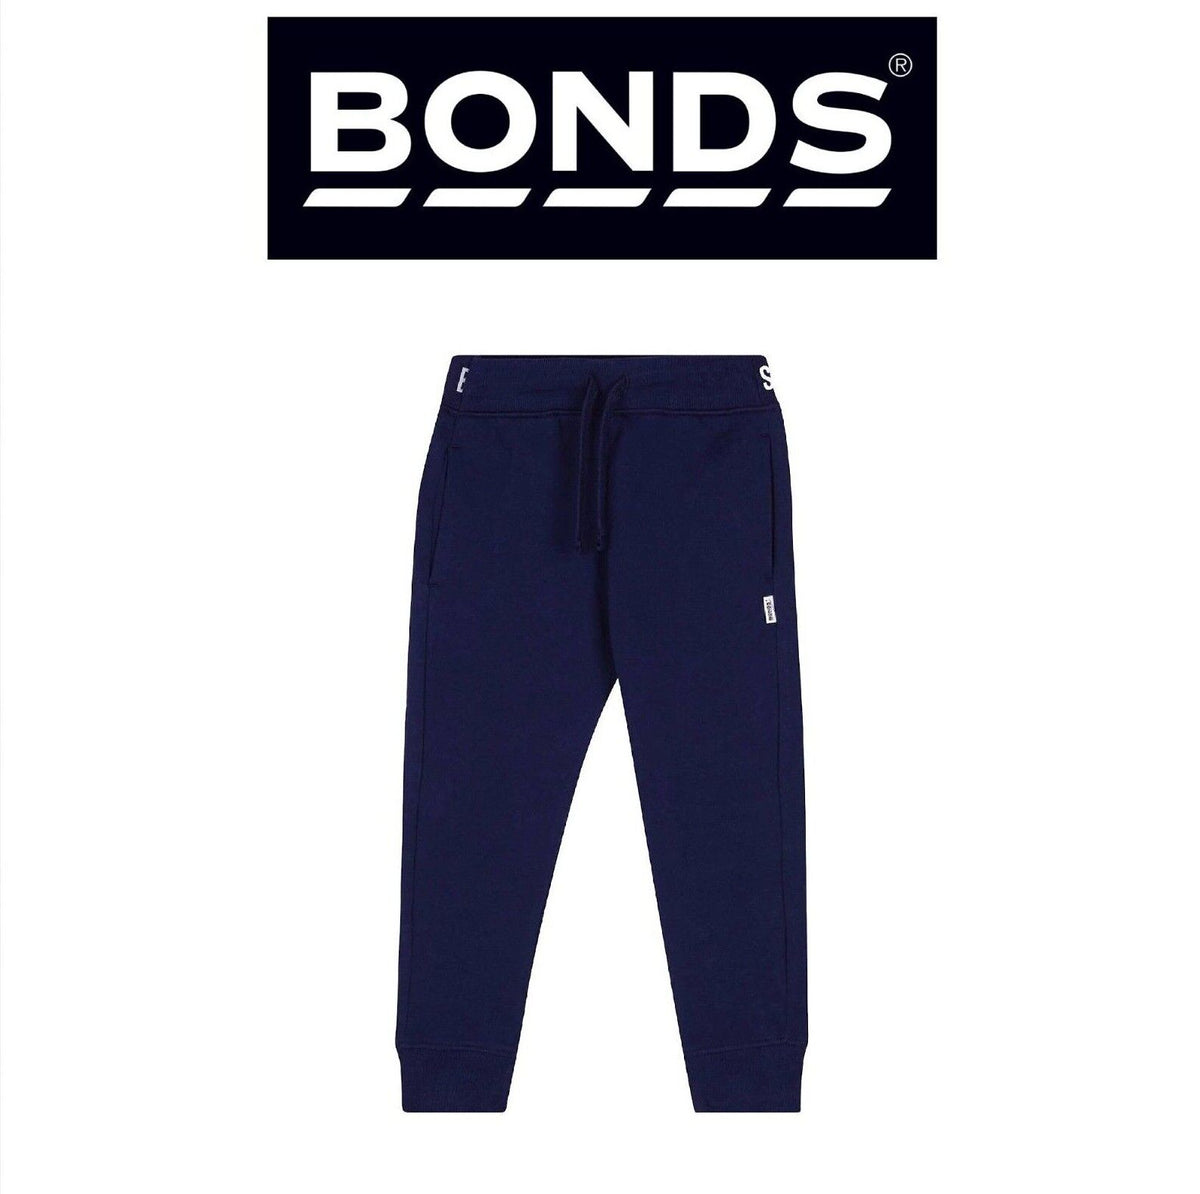 Bonds Baby Fleece Trackie Soft Roomy Drop Crotch Styling and Tapered Legs KVRJA